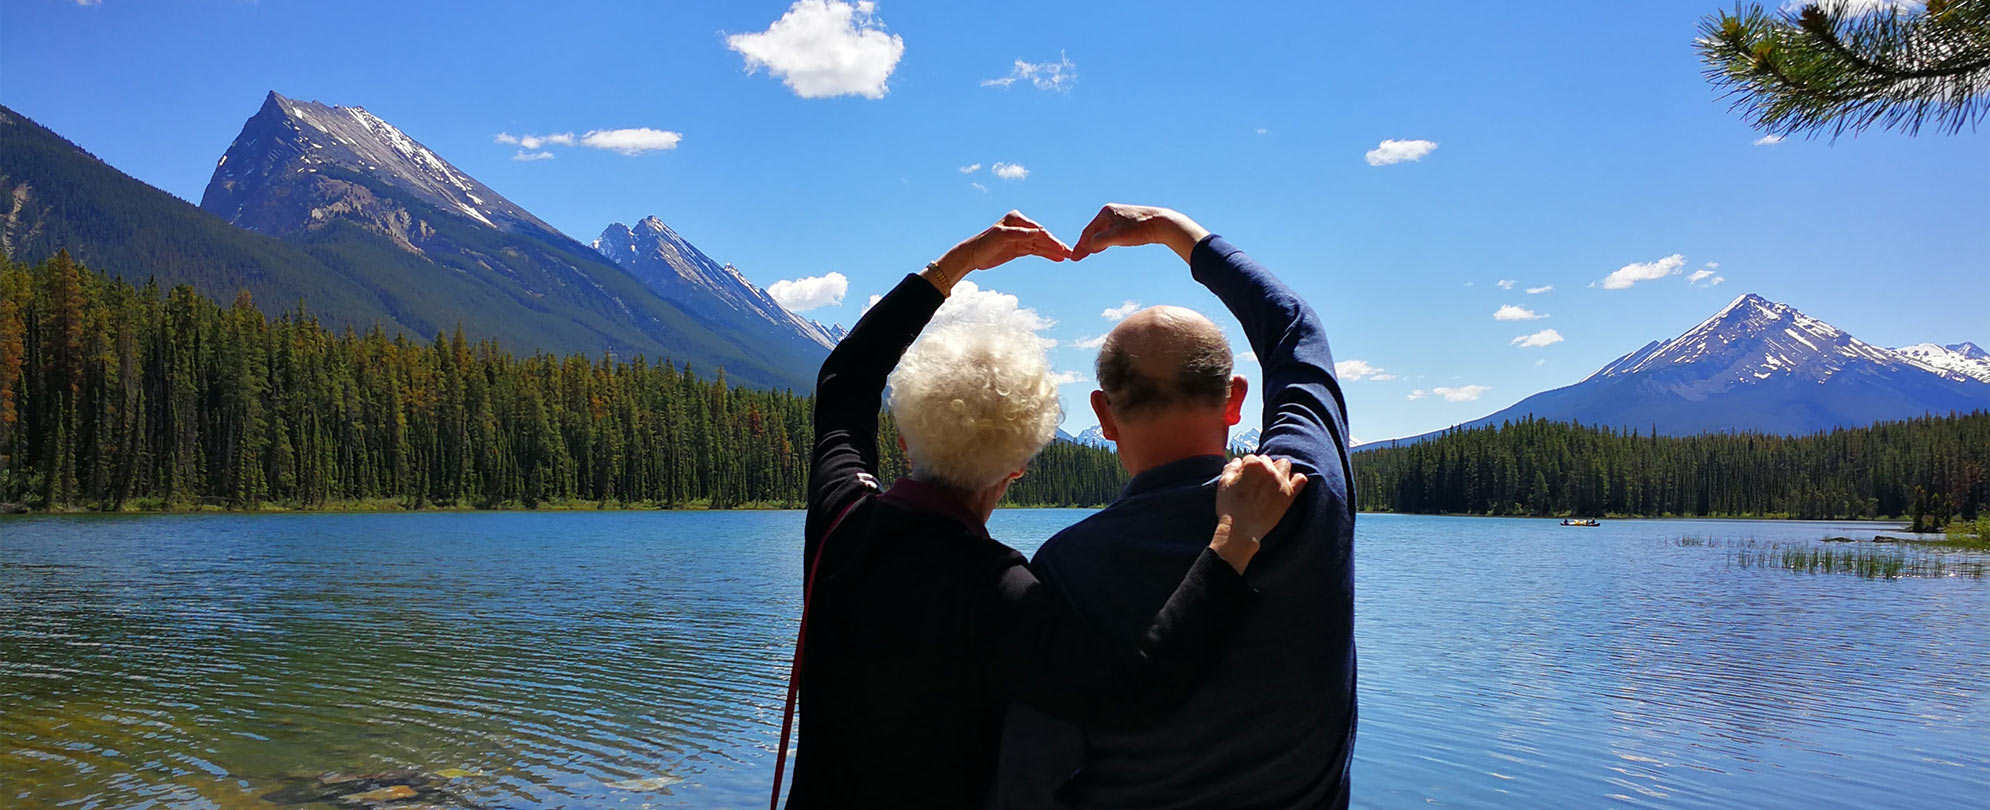 Two Club Wyndham owners pose with their hands forming a heart overlooking mountains and a lake at Banff National Park in Alberta, Canada